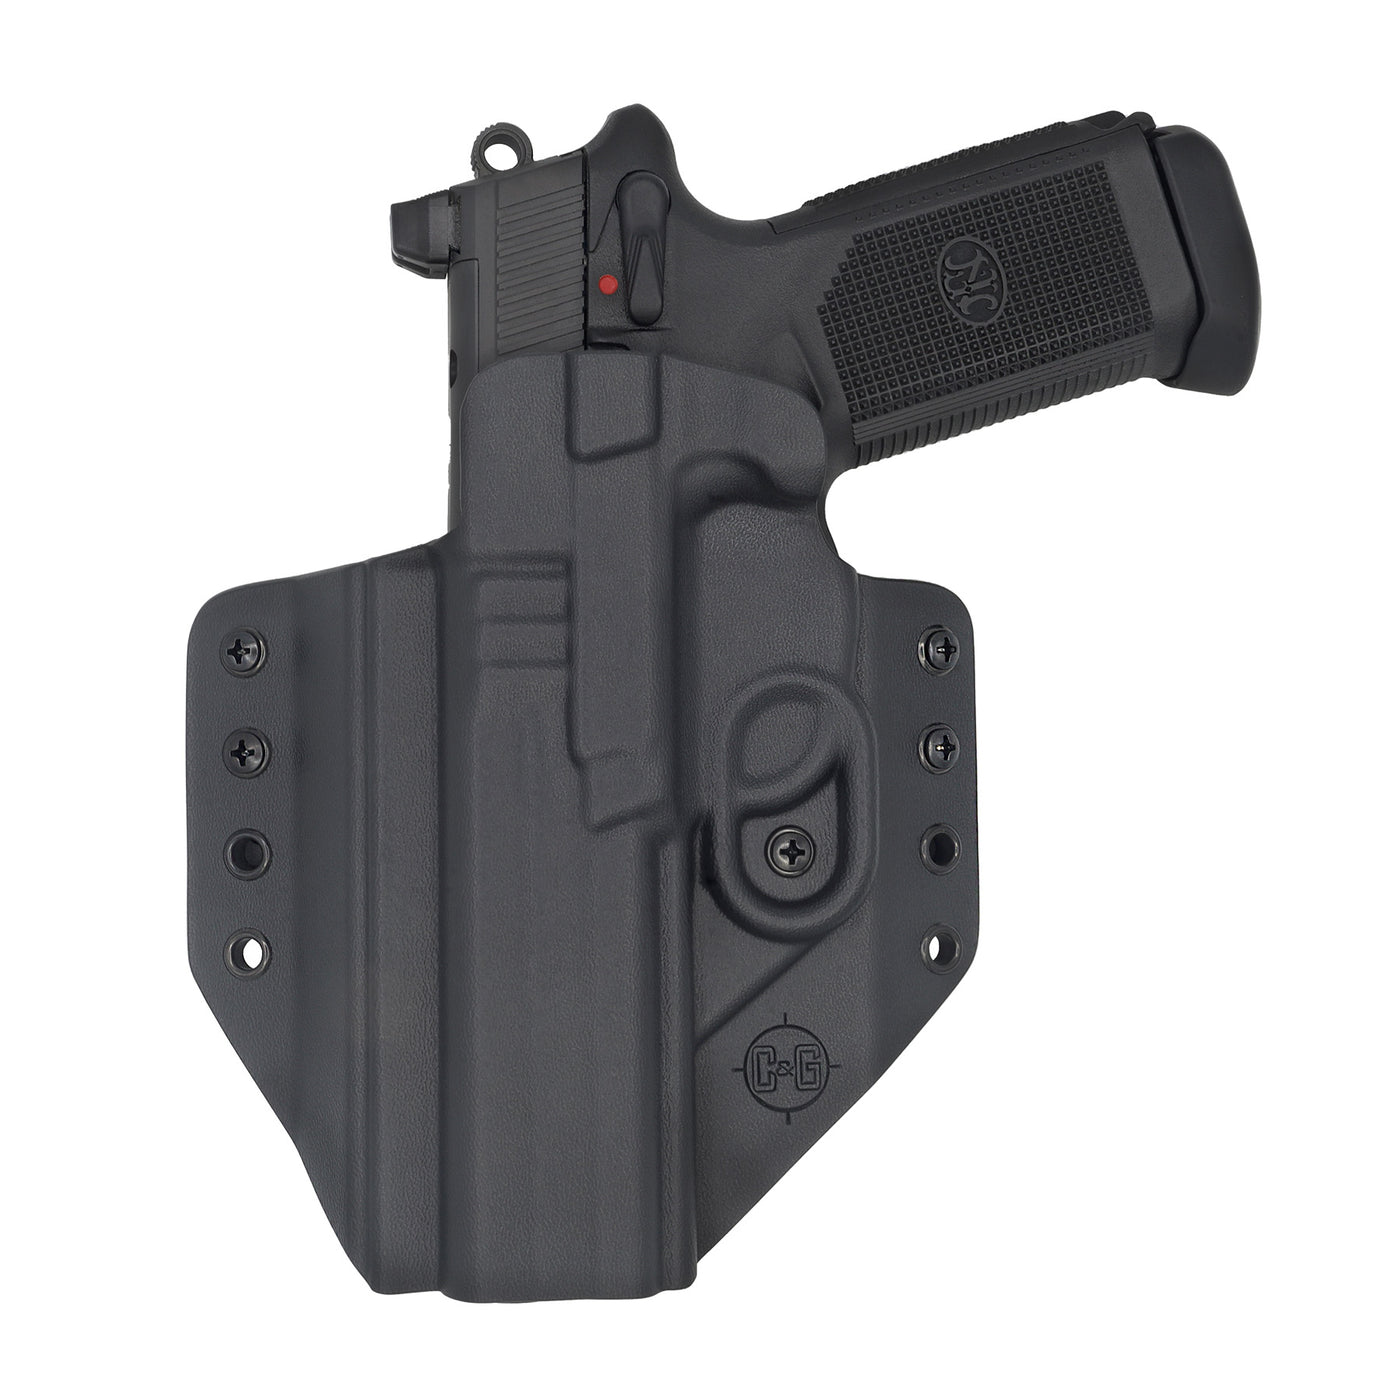 This is the C&G Holsters Left hand outside the waistband Covert series holster for the FNH FNX45T with the gun